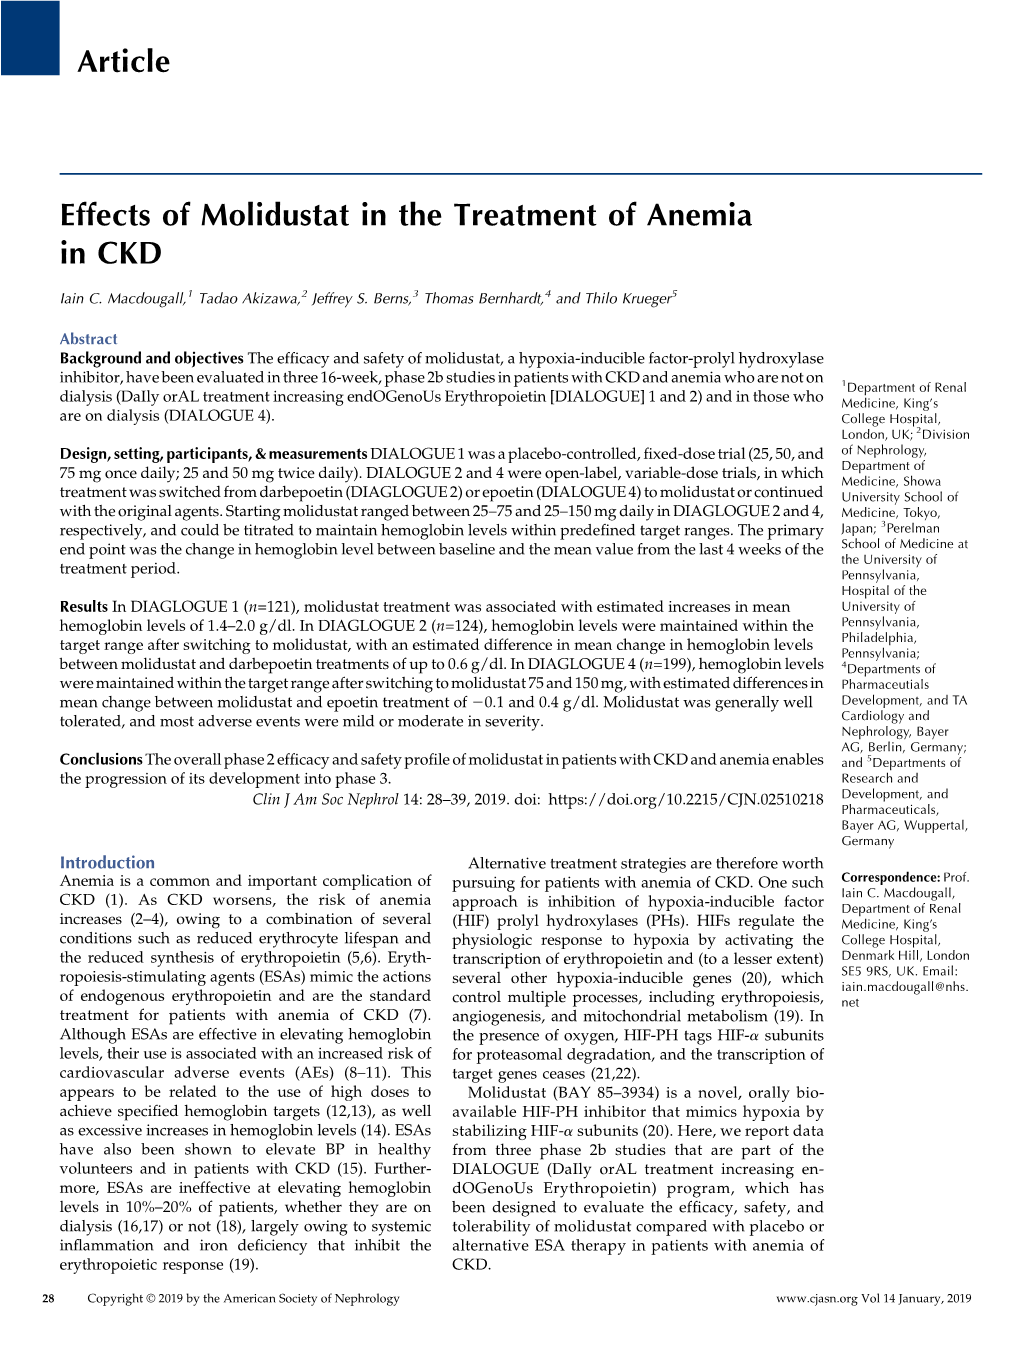 Effects of Molidustat in the Treatment of Anemia in CKD